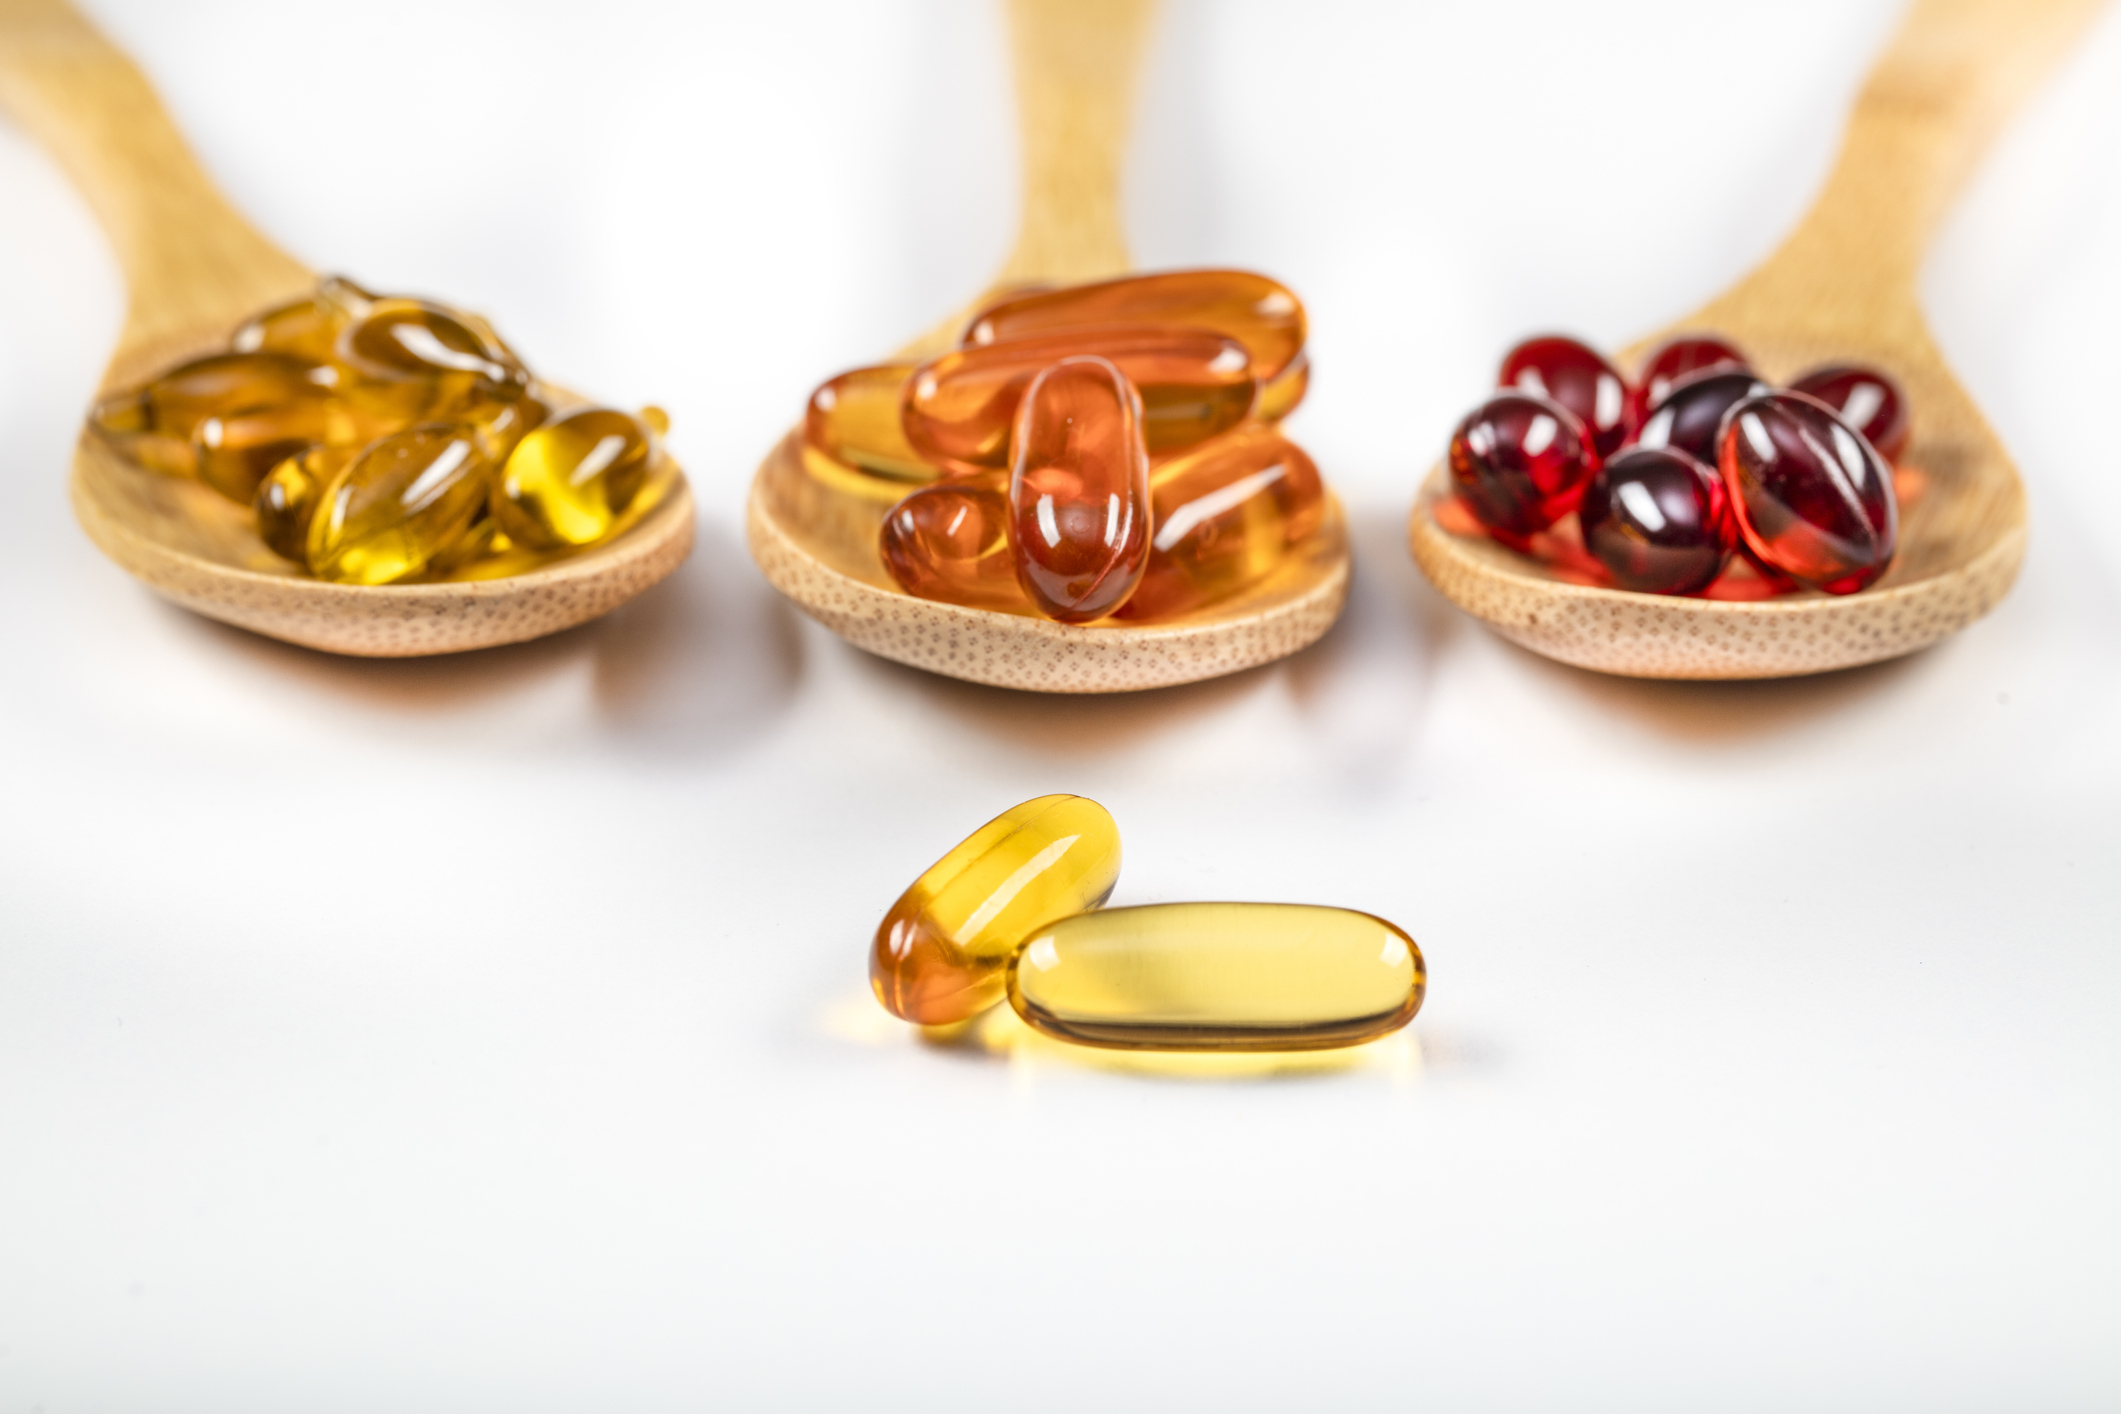 GOED analysis supports quality levels US omega-3 supplements